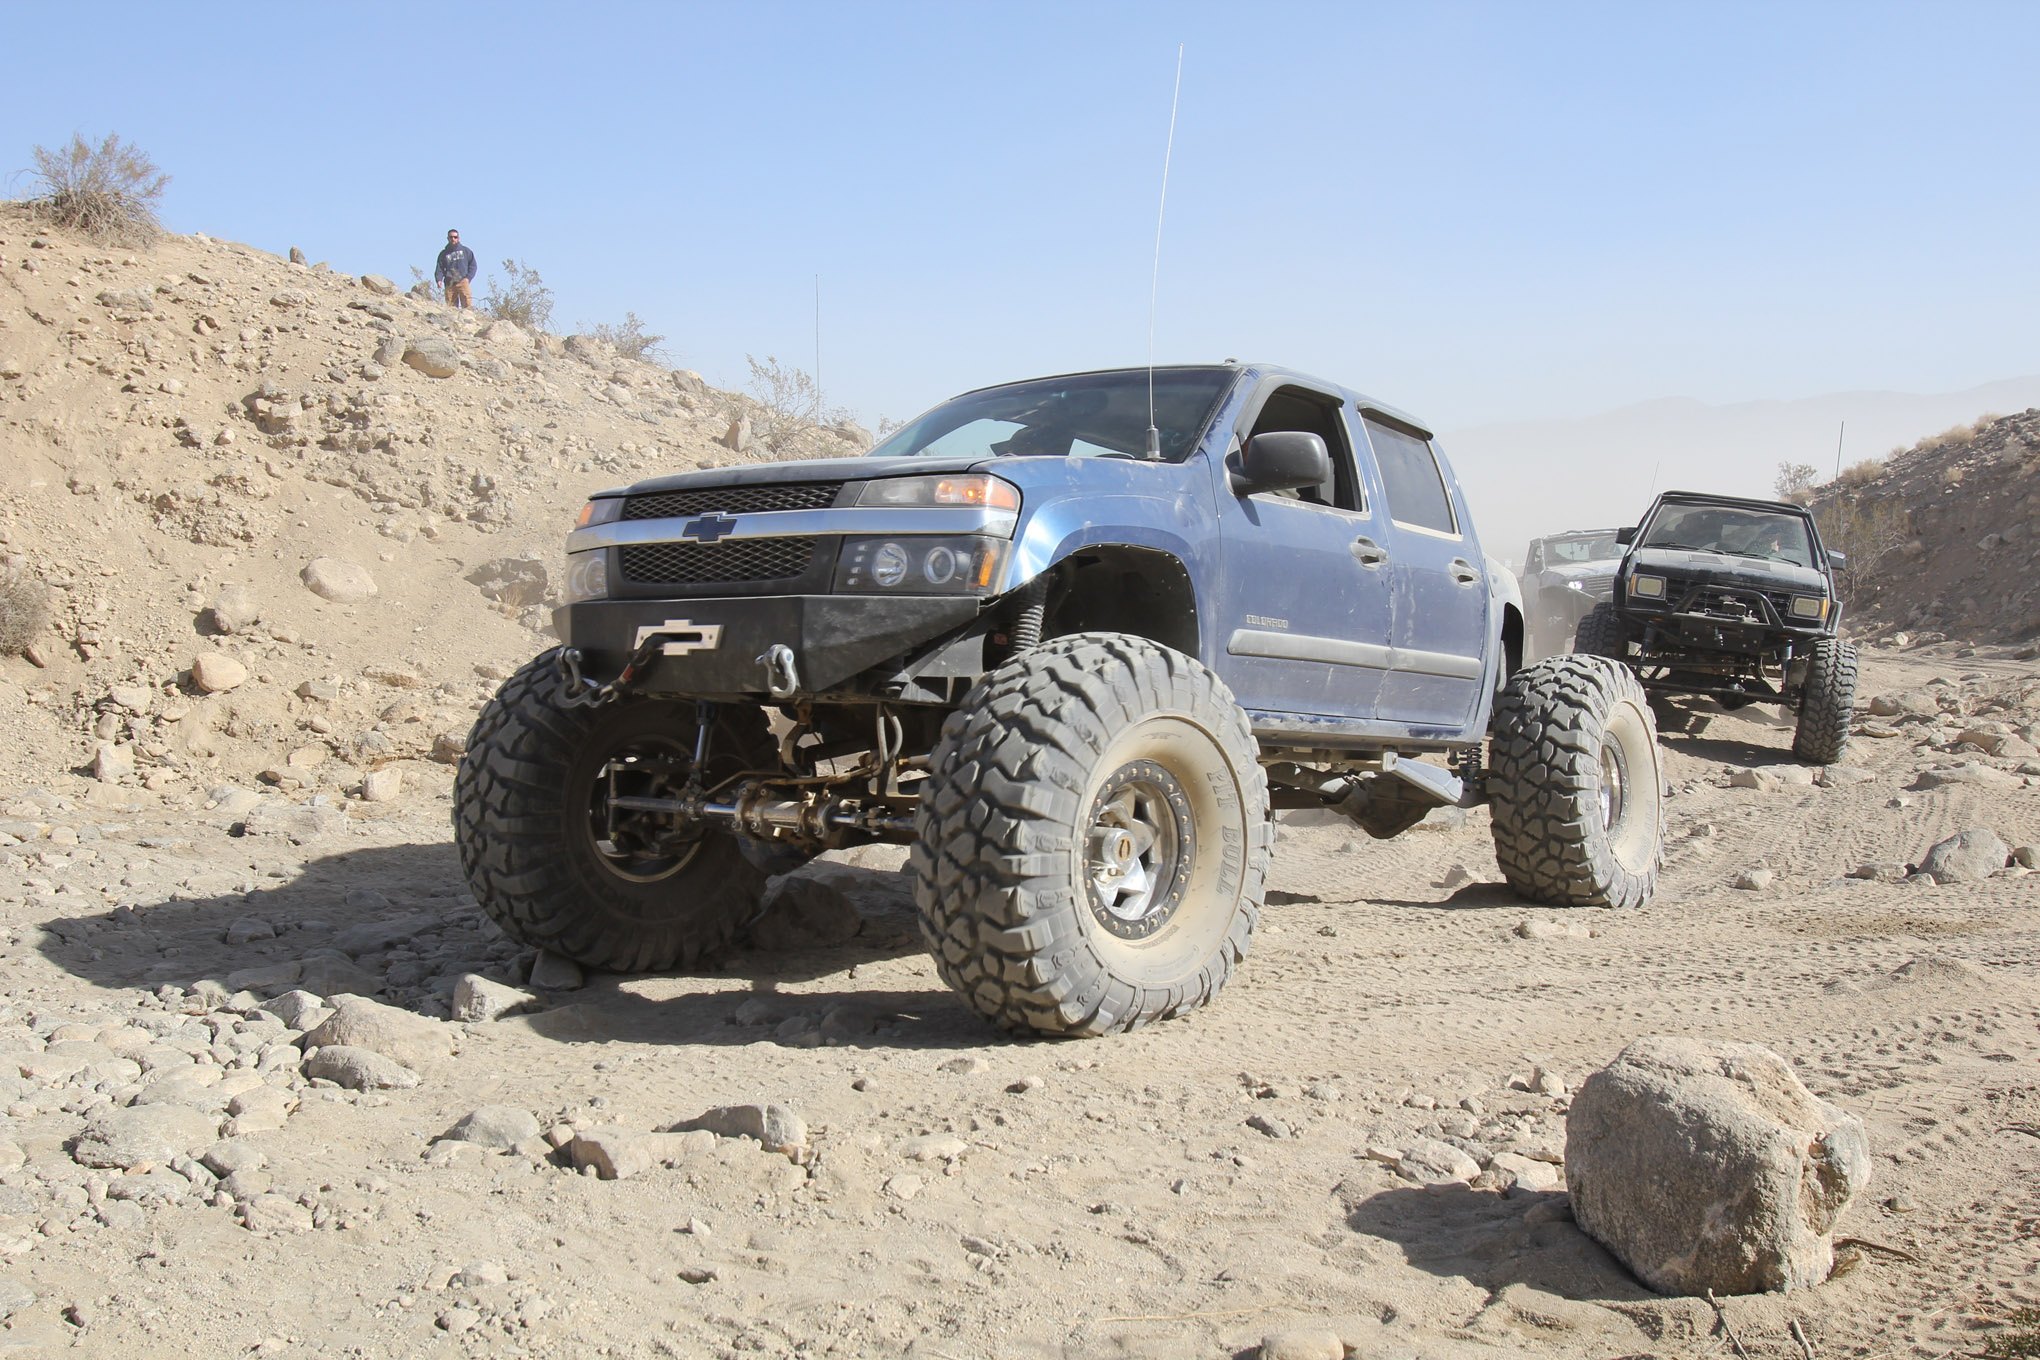 Aftermarket Headlights on Blue Lifted Chevy Colorado - Photo by fourwheeler.com